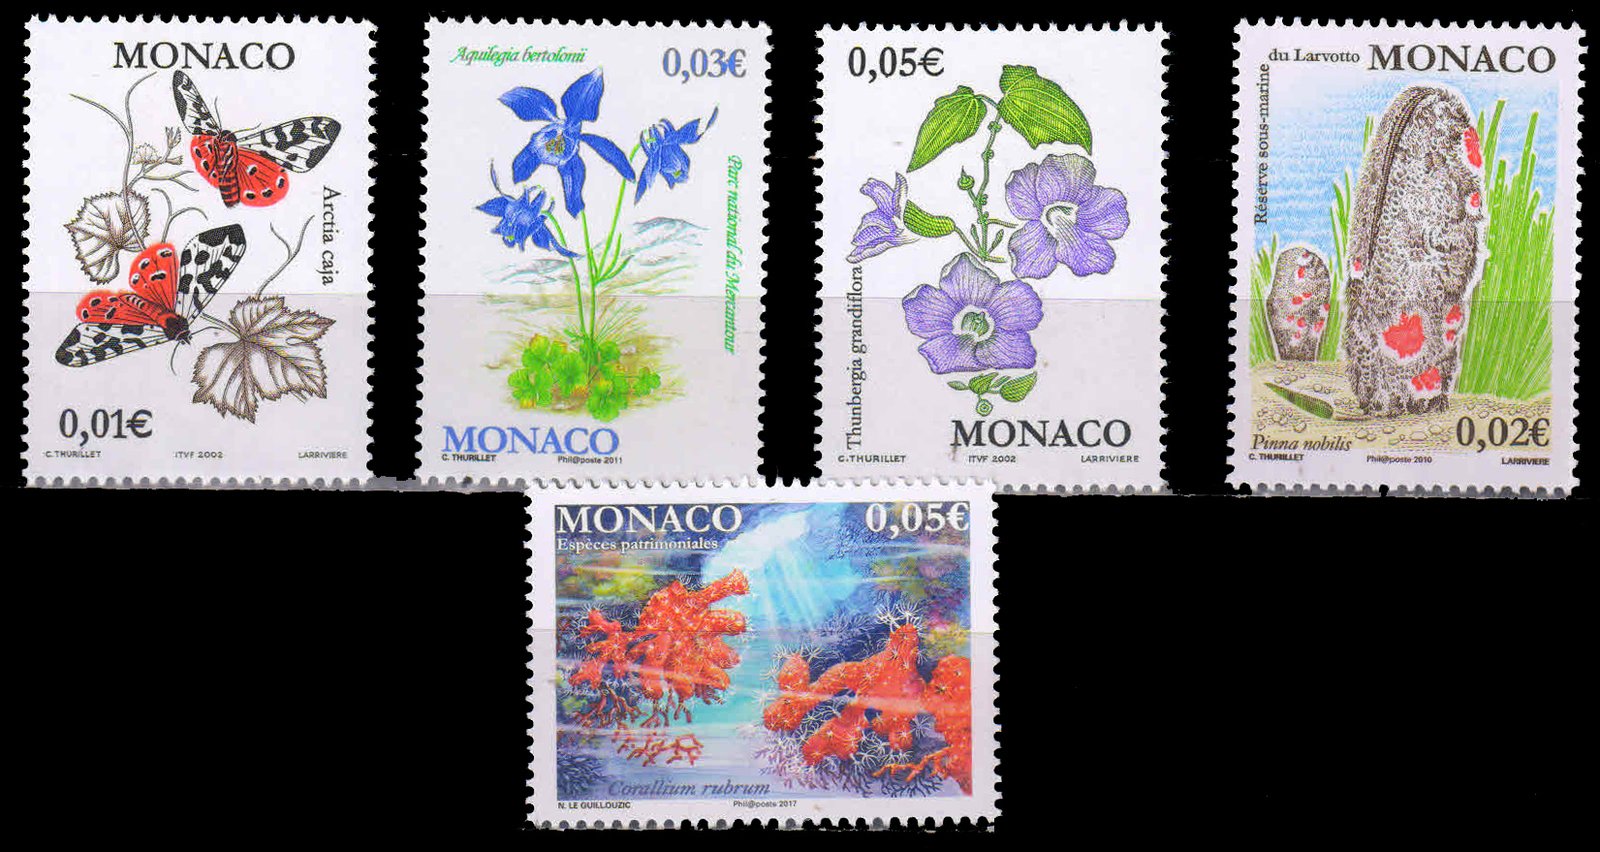 MONACO-5 Different Thematic Stamps-MNH